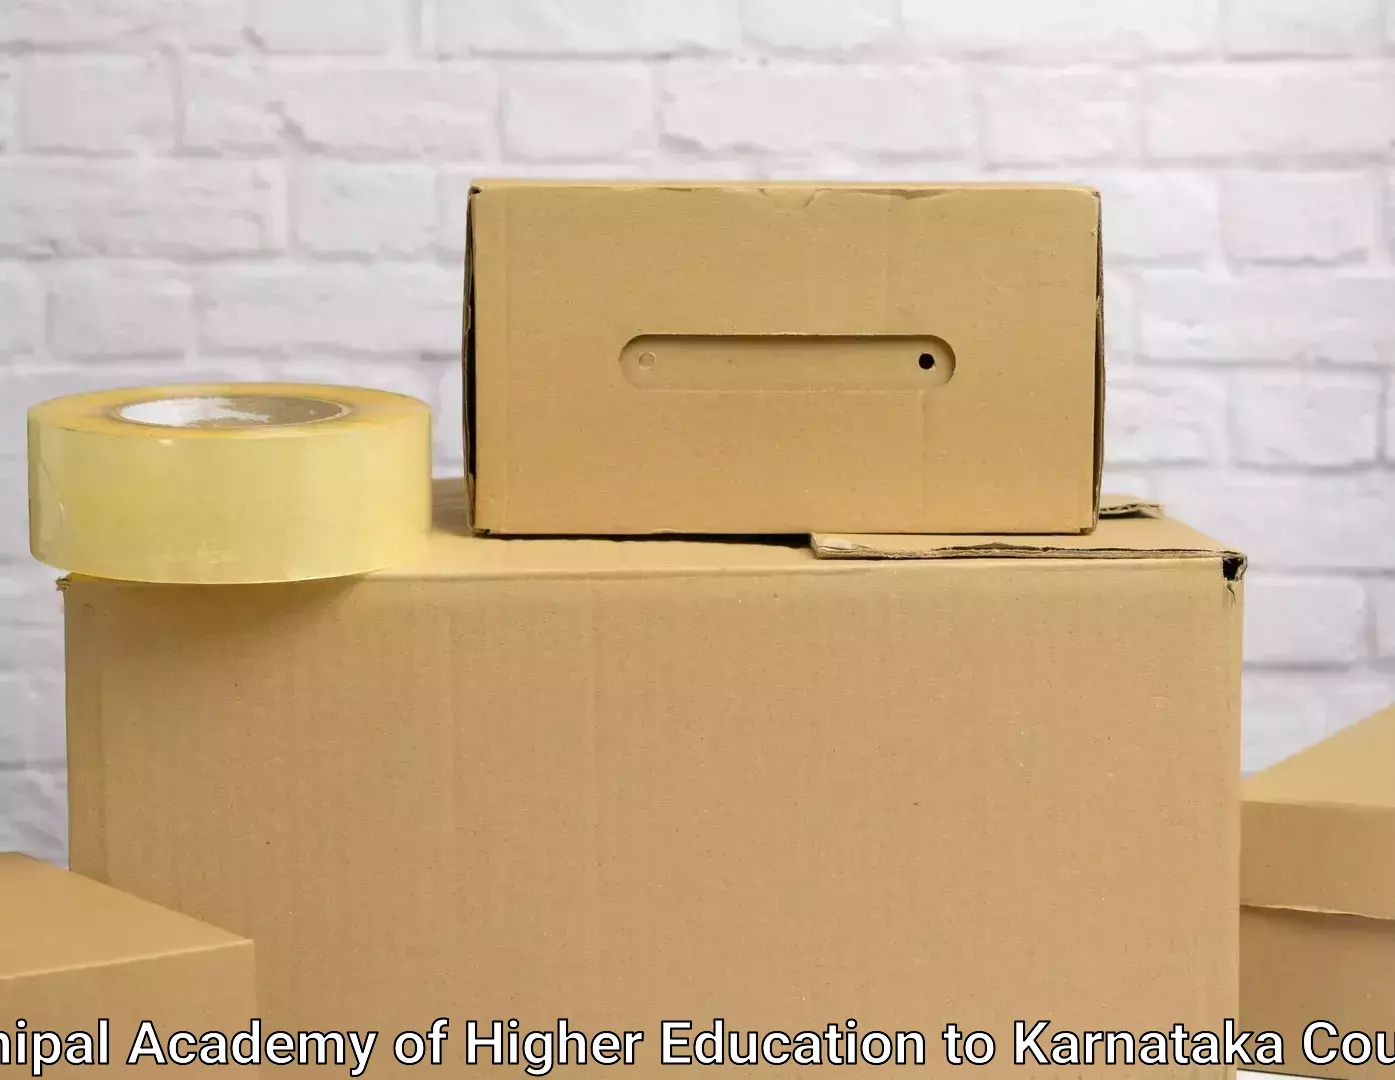 Trusted moving company Manipal Academy of Higher Education to Karnataka